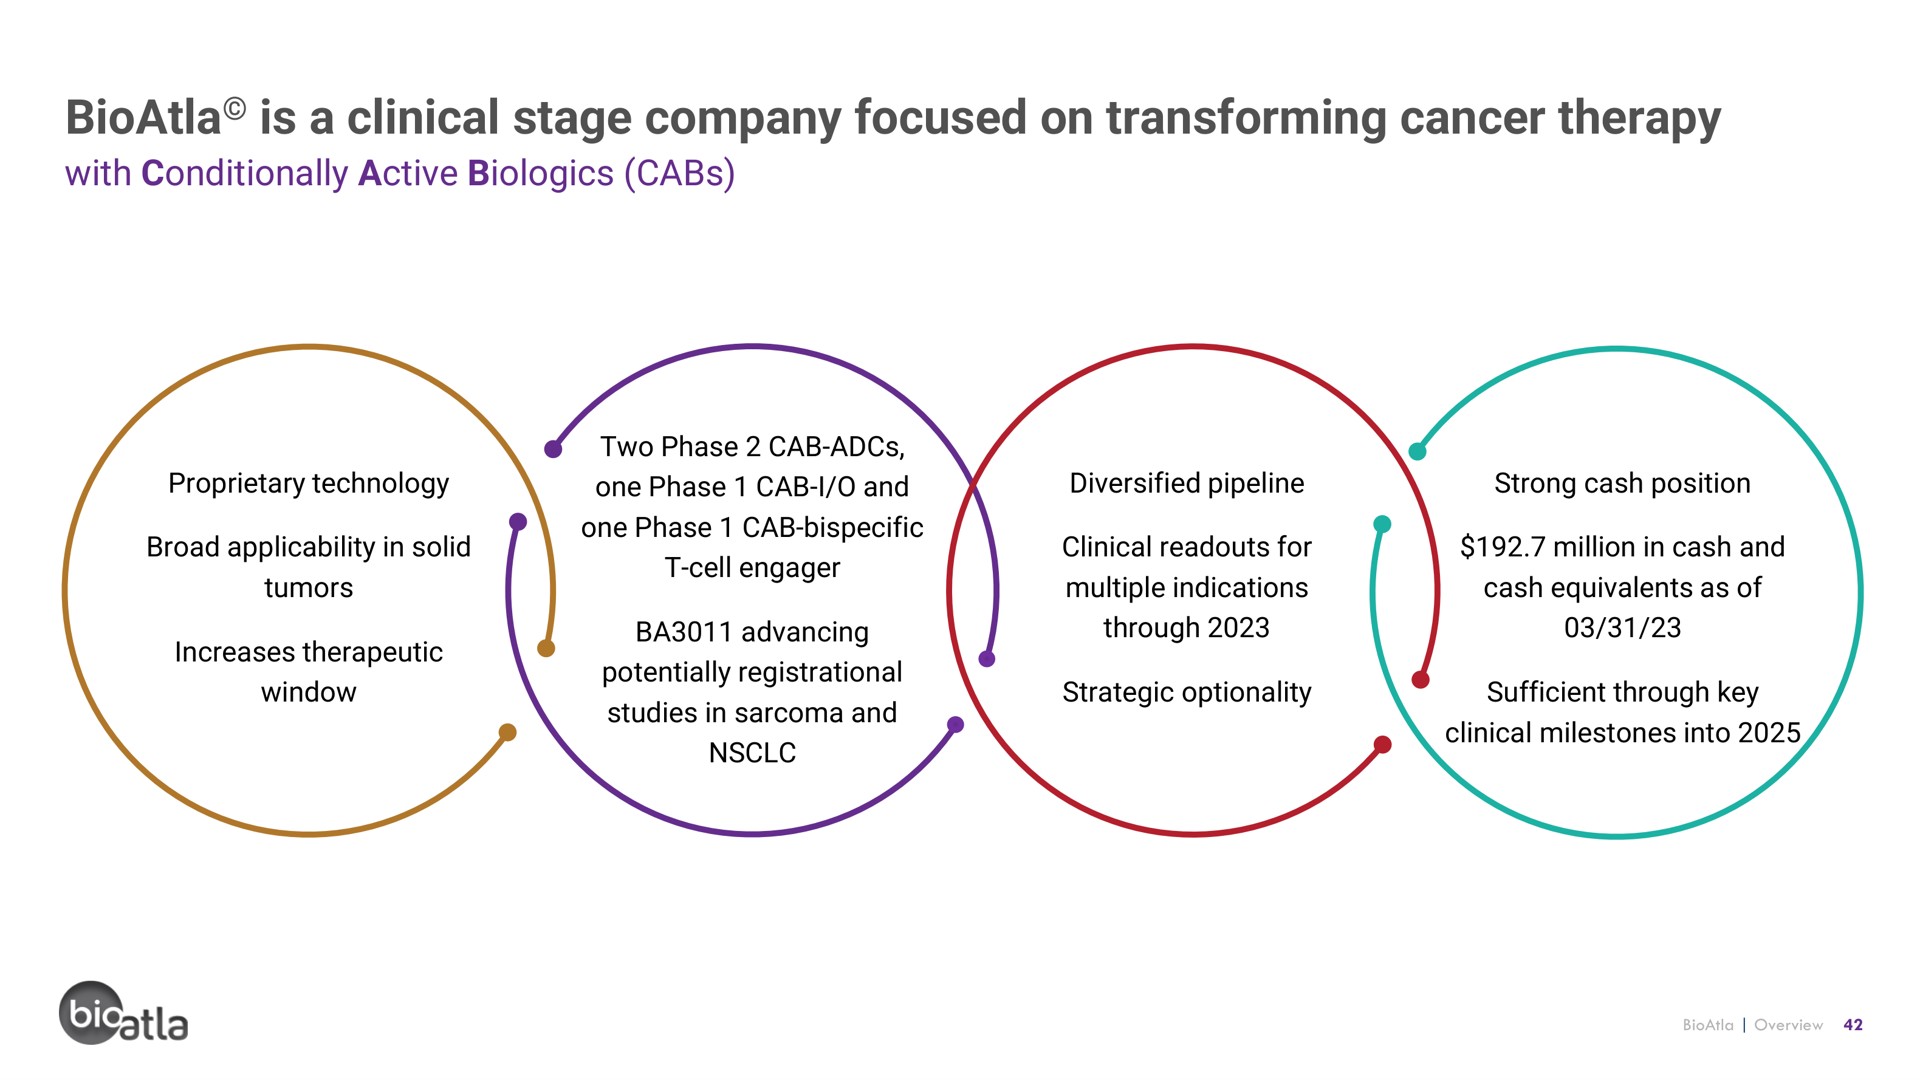 is a clinical stage company focused on transforming cancer therapy | BioAtla